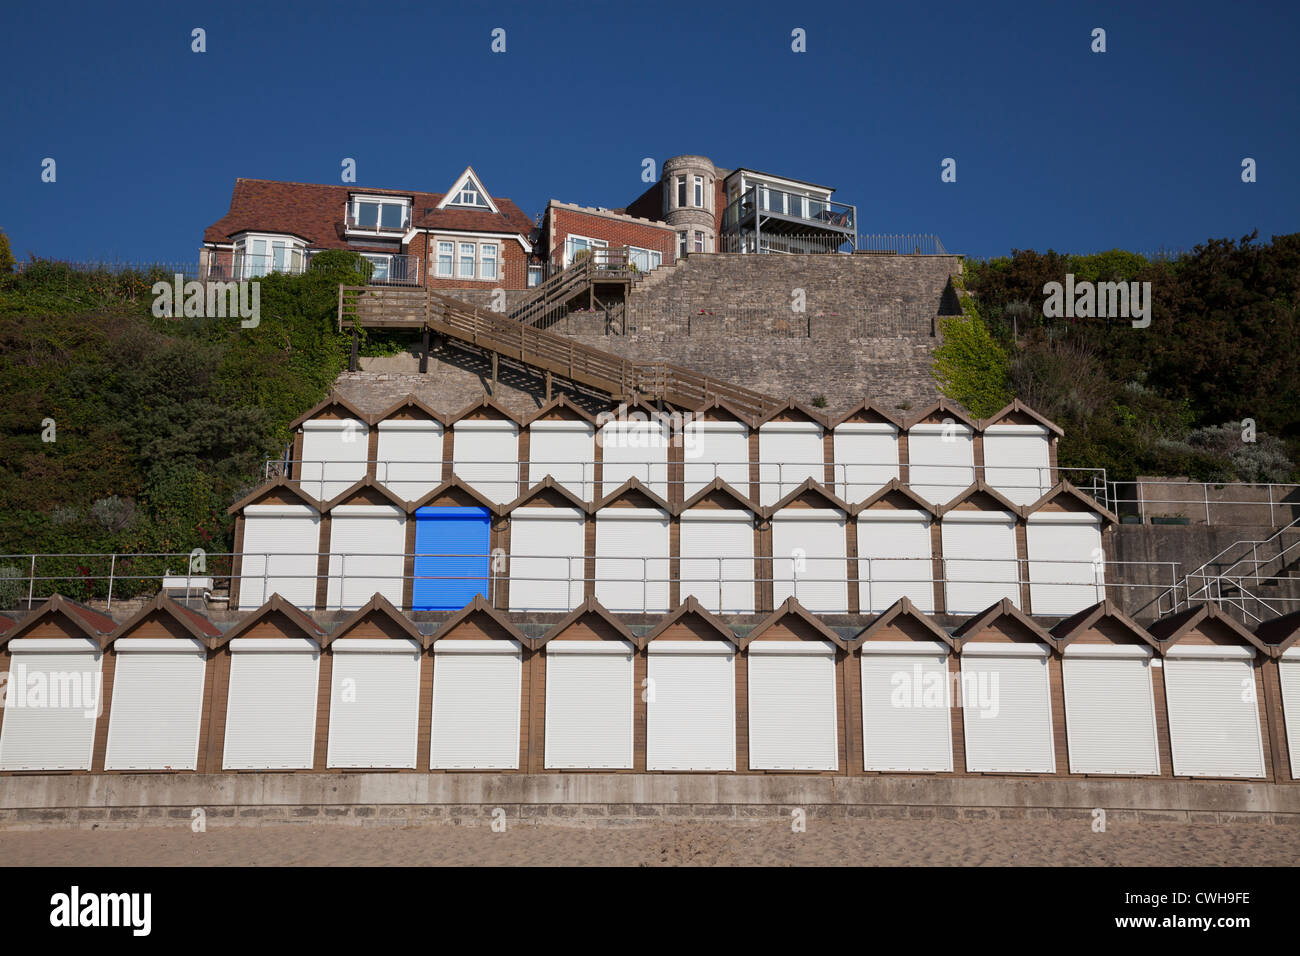 Three levels of Beach huts with white roller shutter doors and one blue door (digitally created) Stock Photo